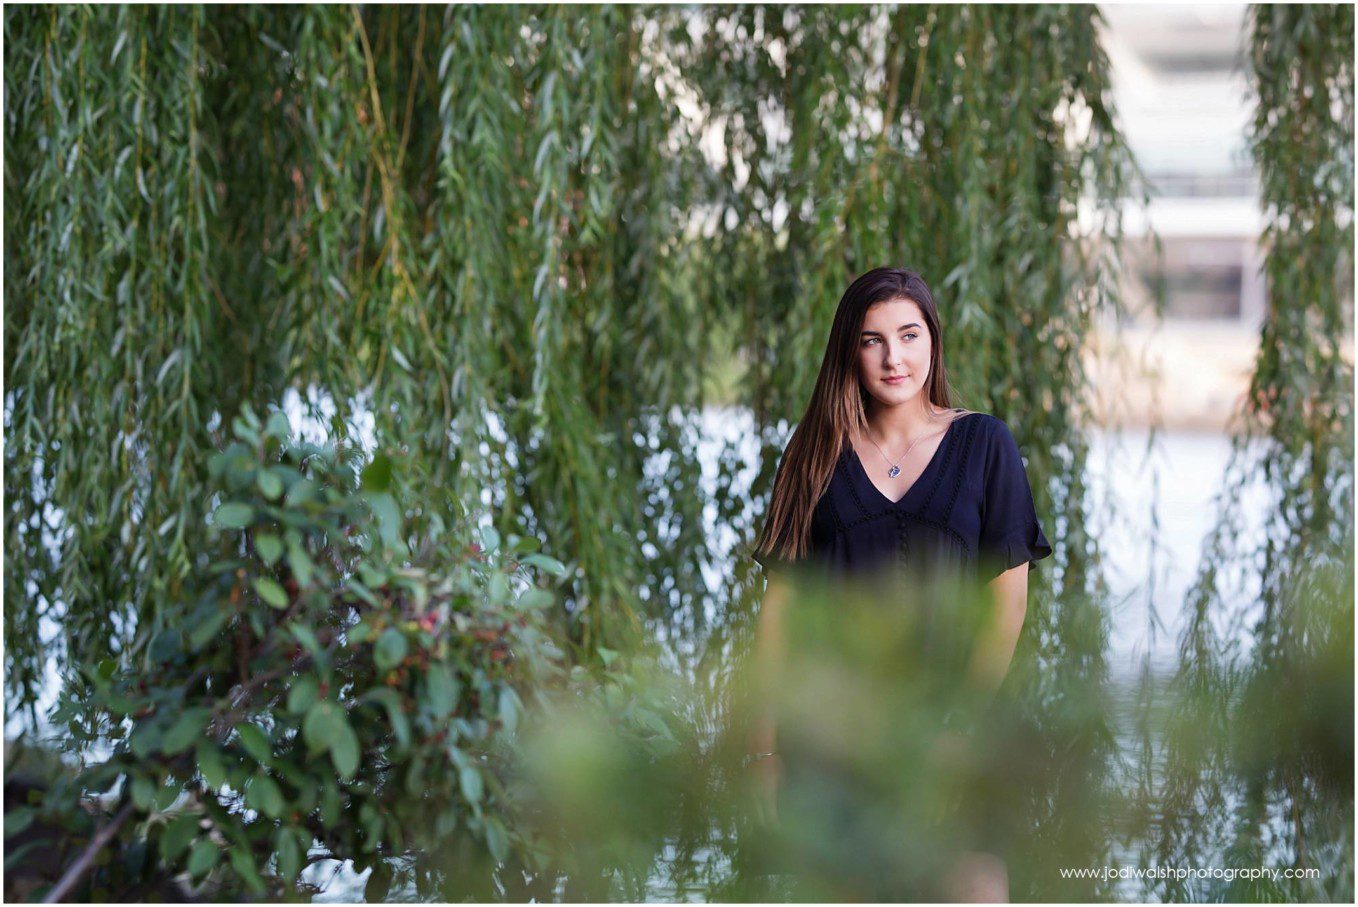 image of a senior girl standing with the branches of a willow hanging around her. She's wearing a black dress and is looking thoughtfully off to the right.